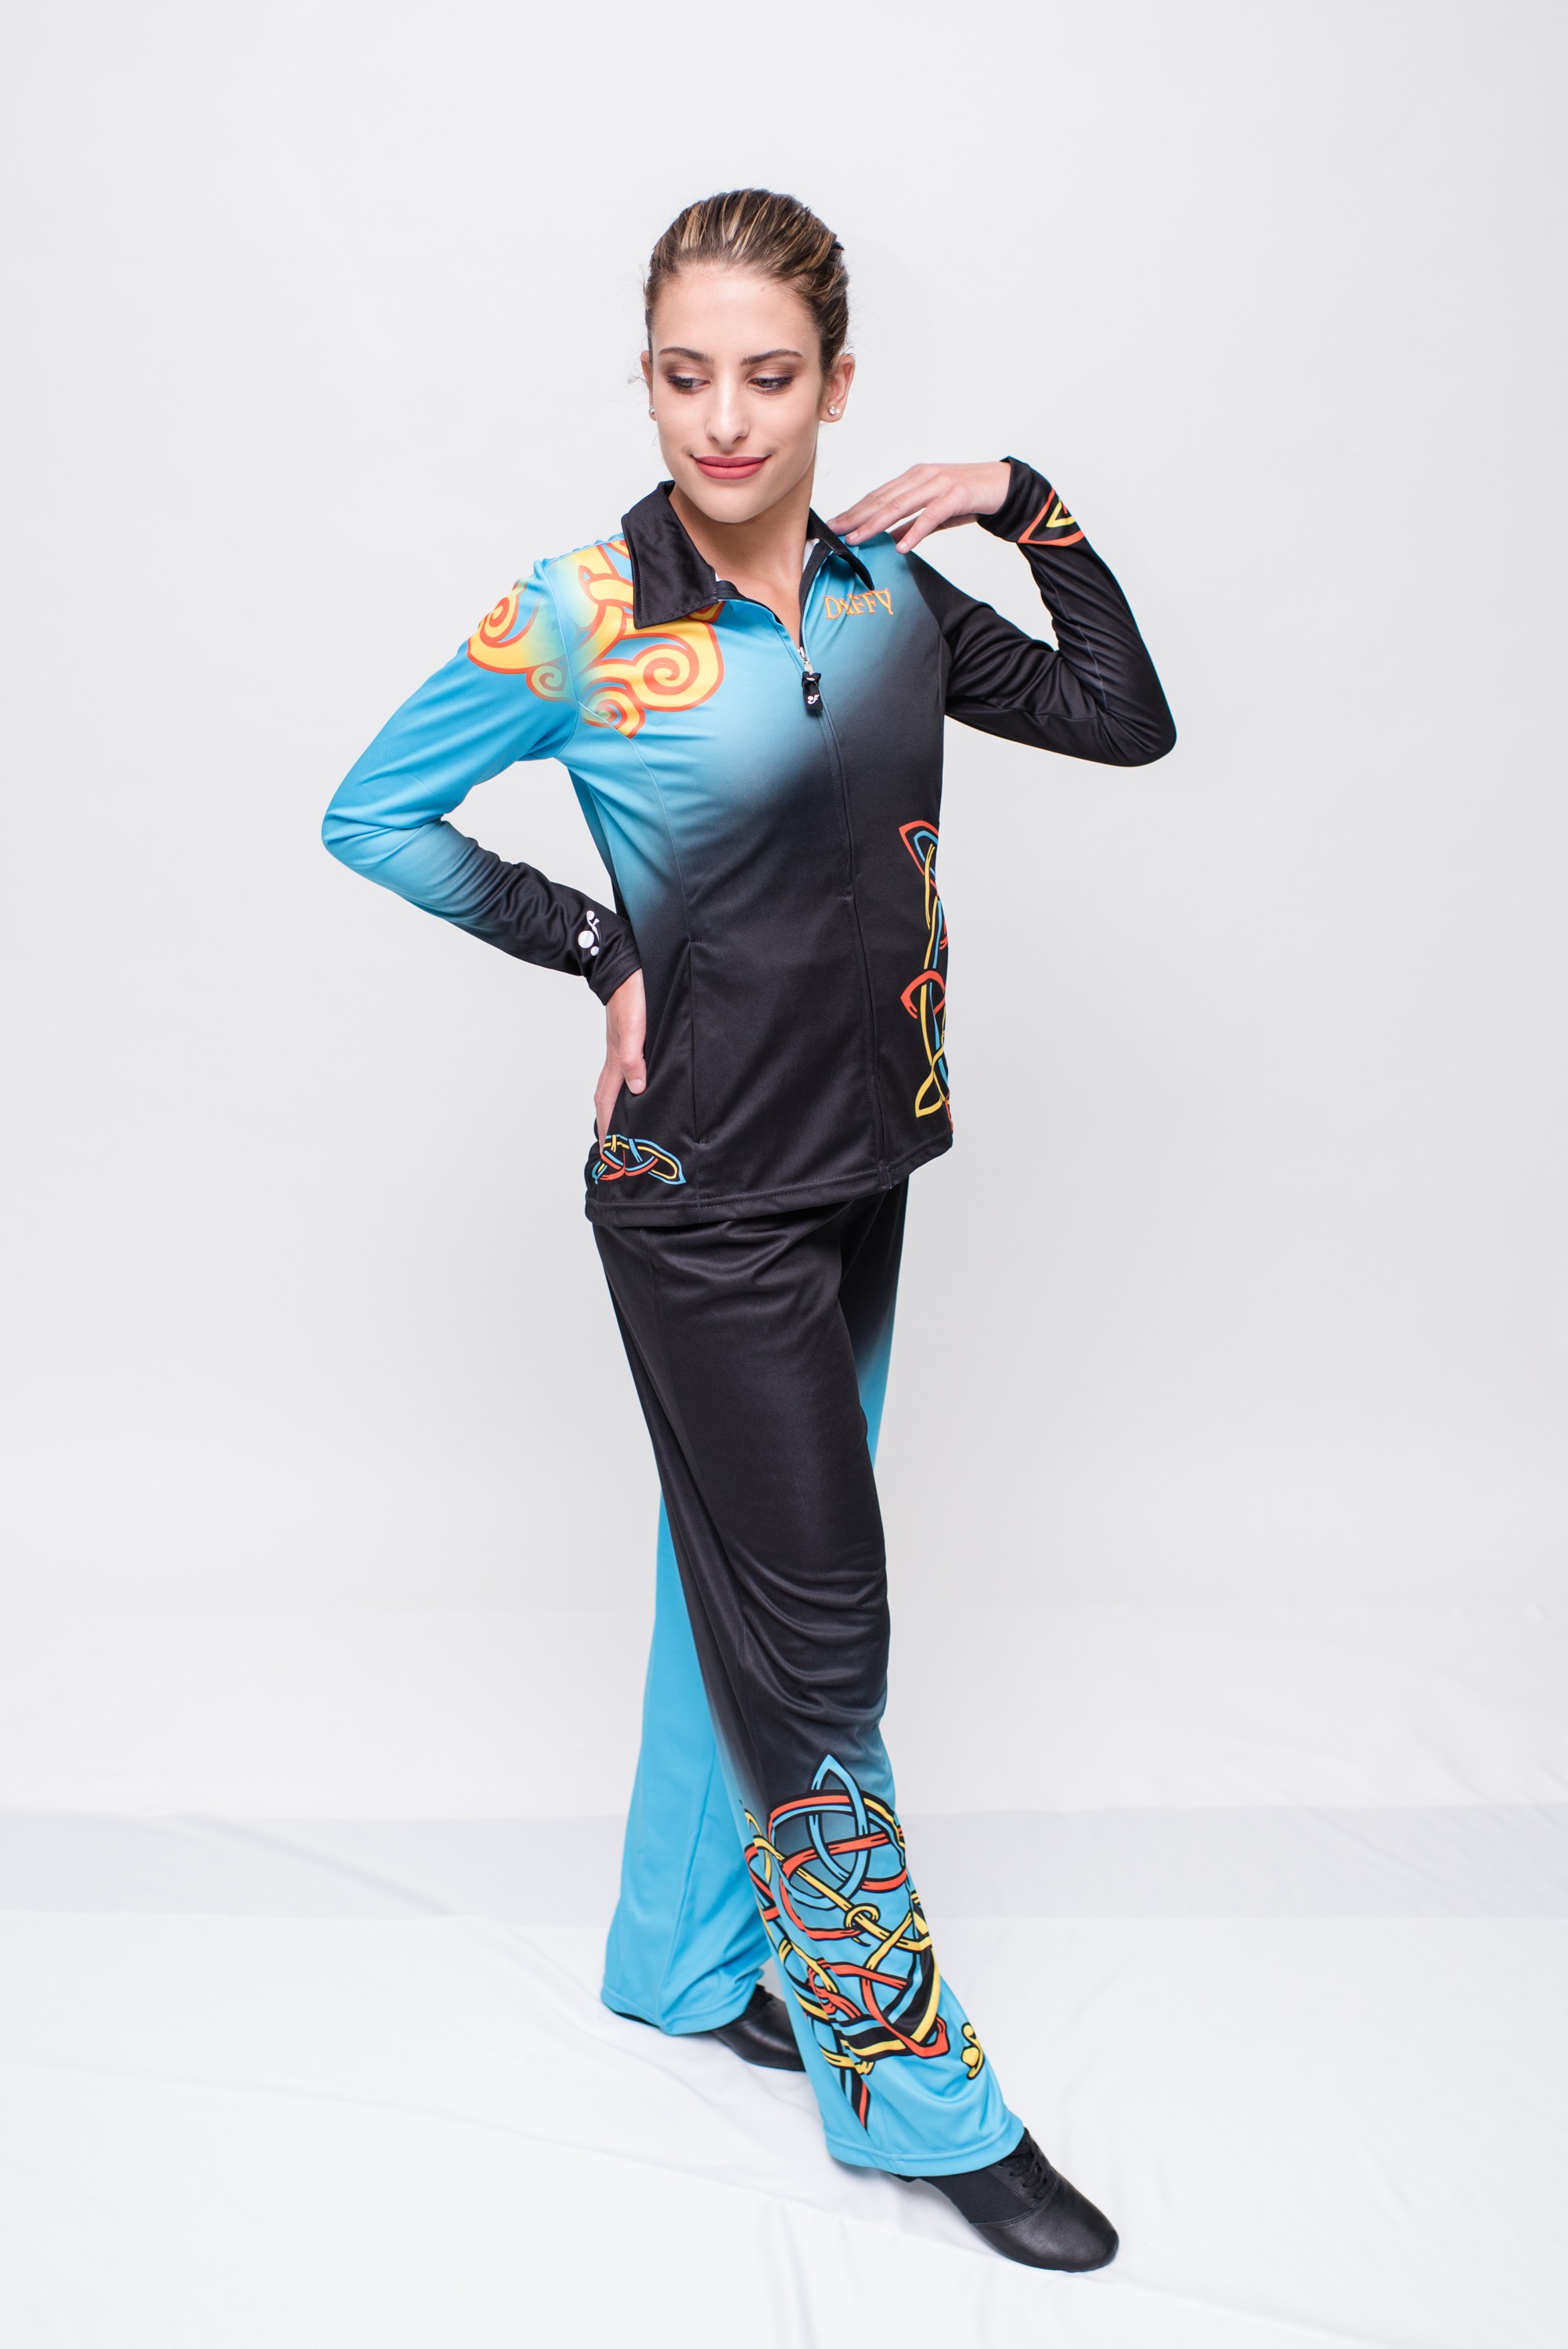 Beautiful color blending in this Irish  Dance Jacket  by Cheer Factor Fashion Designers